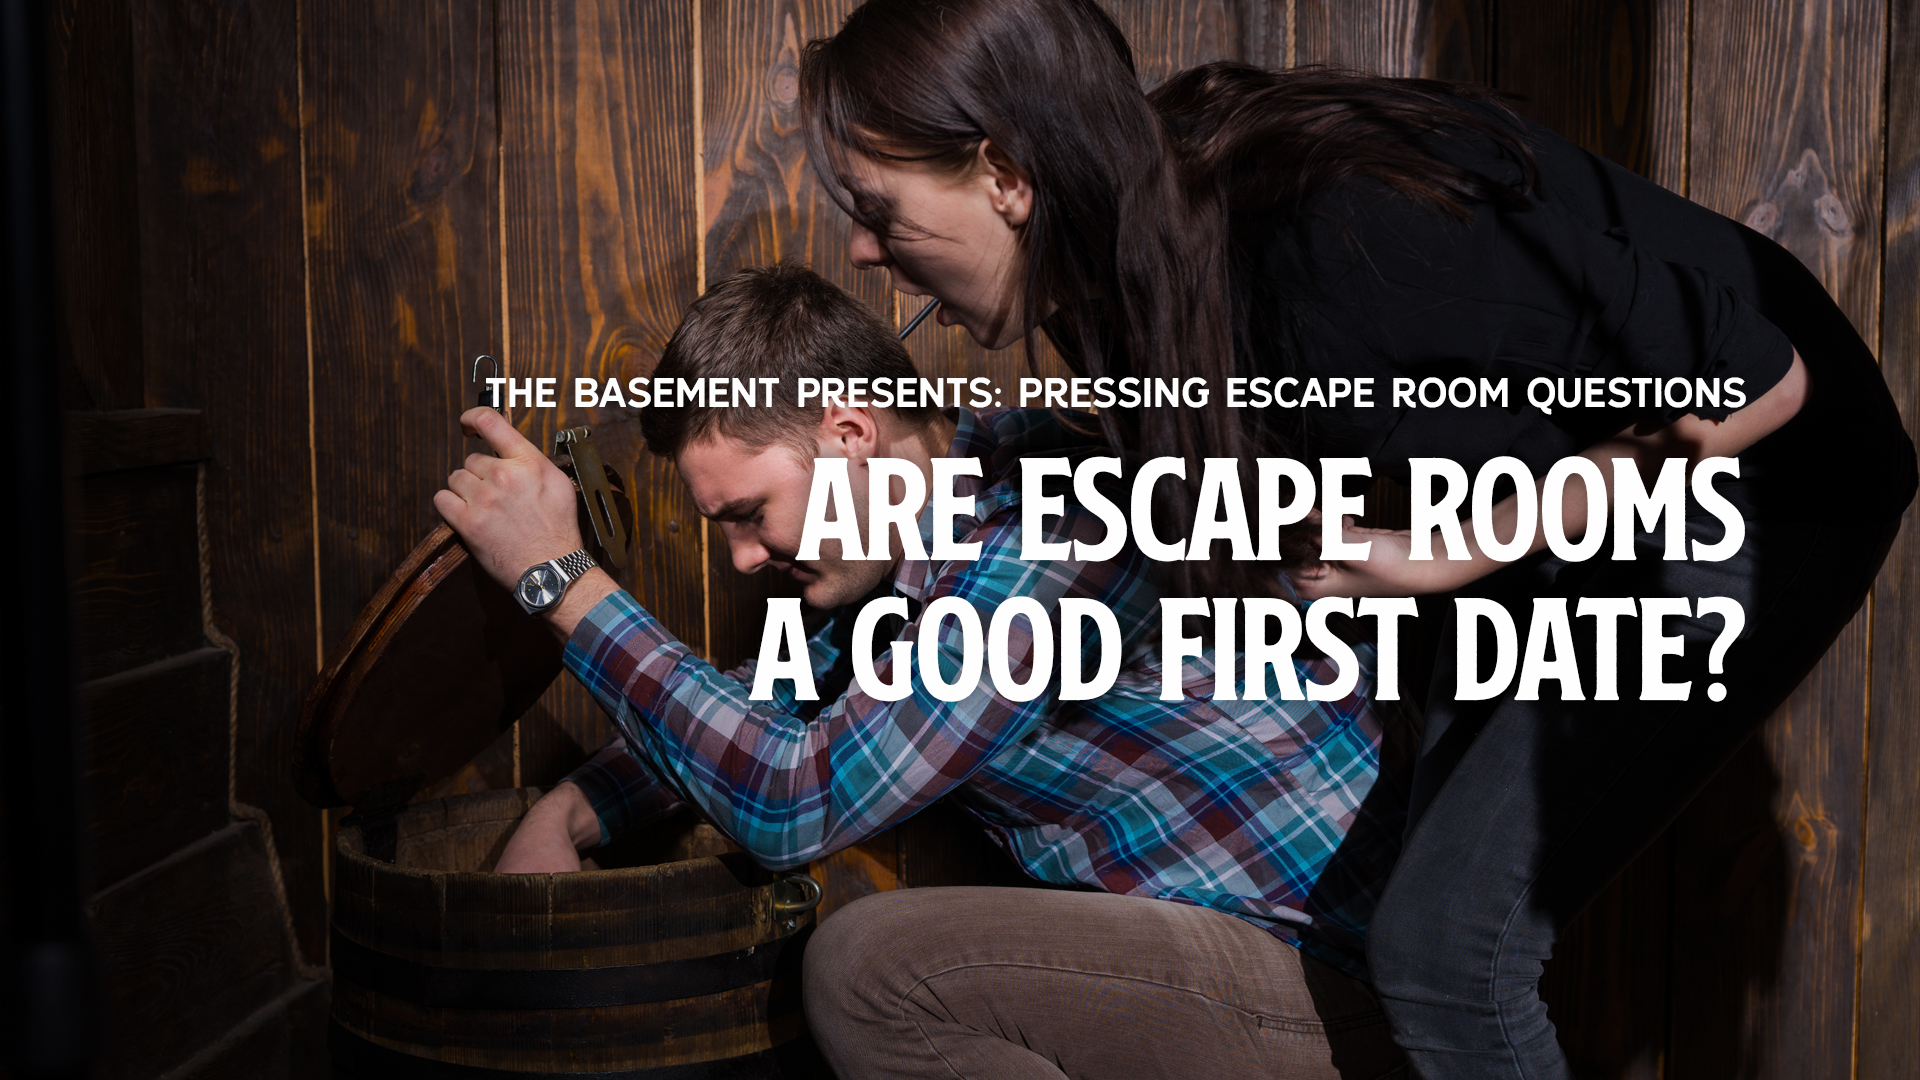 Are Escape Rooms a Good First Date?